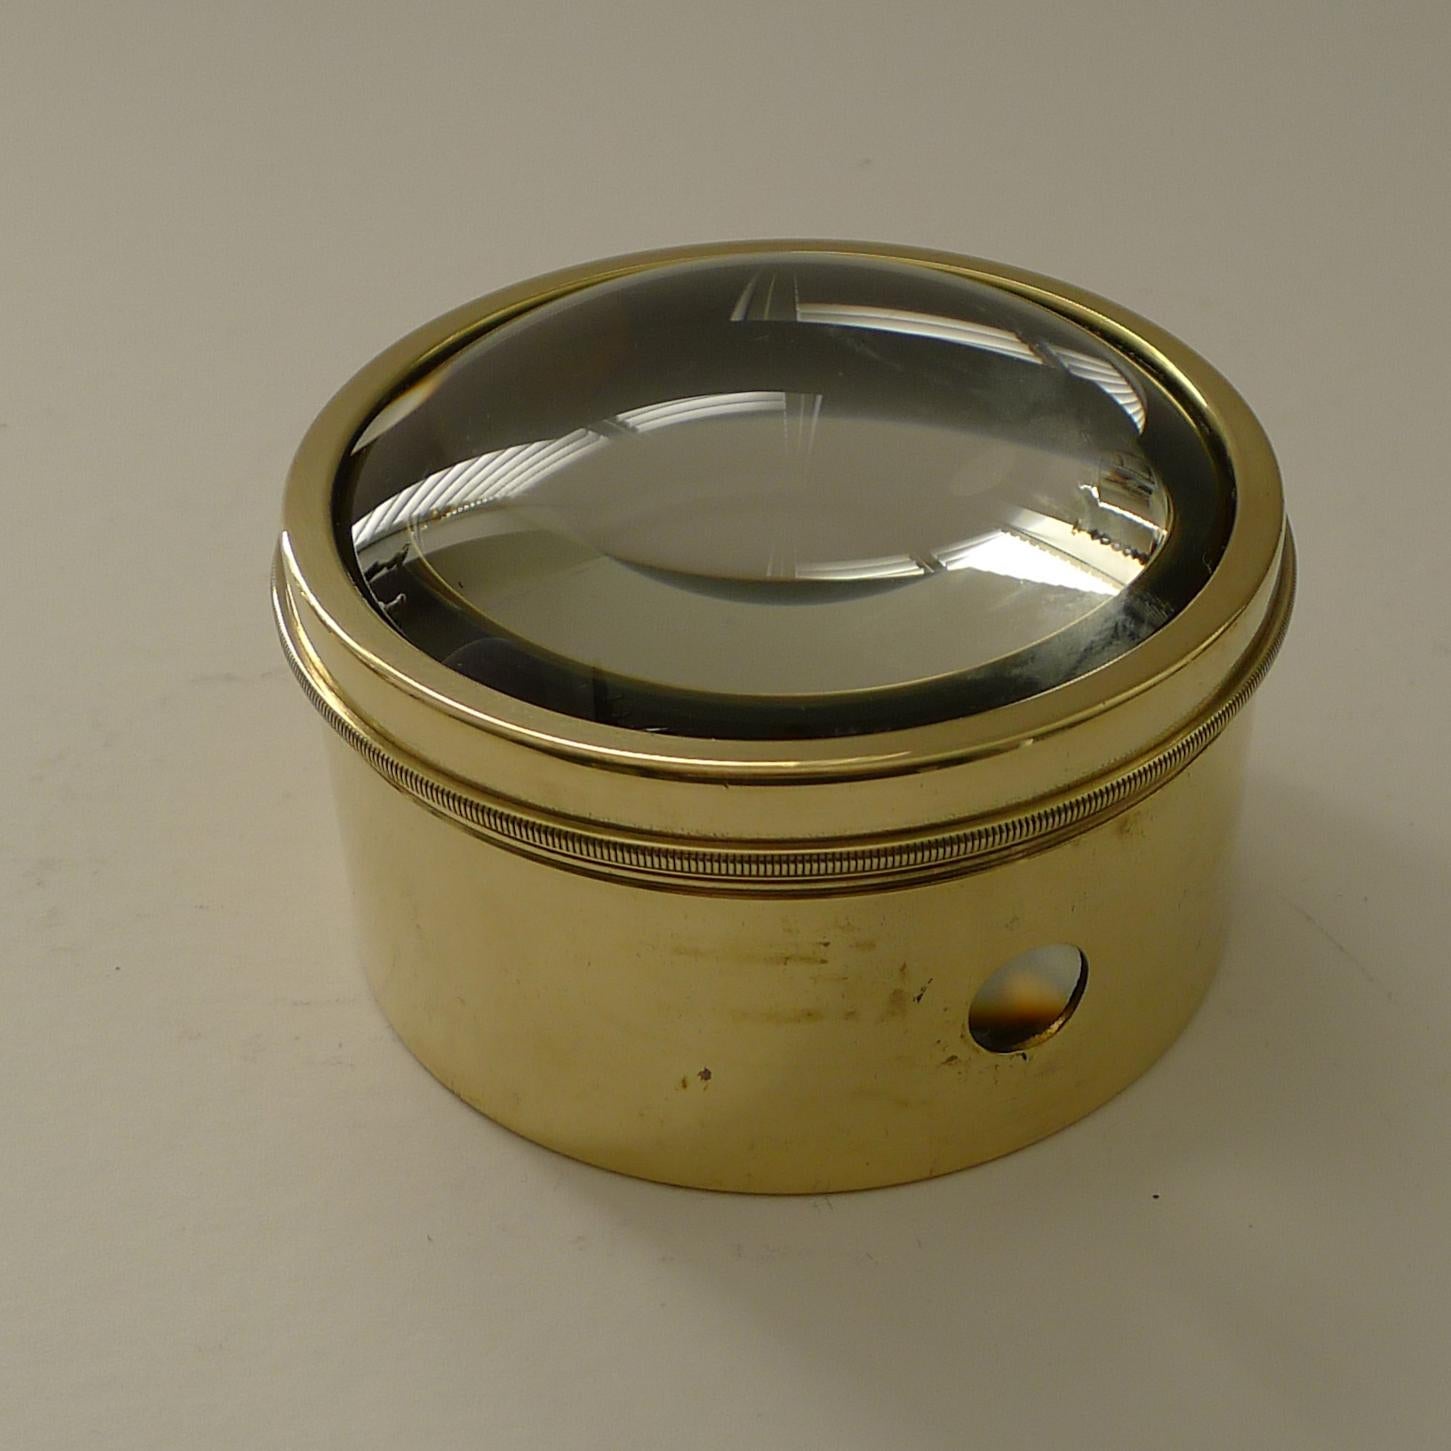 Always very popular and a very useful desk-top accessory. 

These circular magnifiers actually are the condenser or magnifier from a Magic Lantern dating to around 1910 they are rescued, polished up and put back to use in the modern day.  

This one